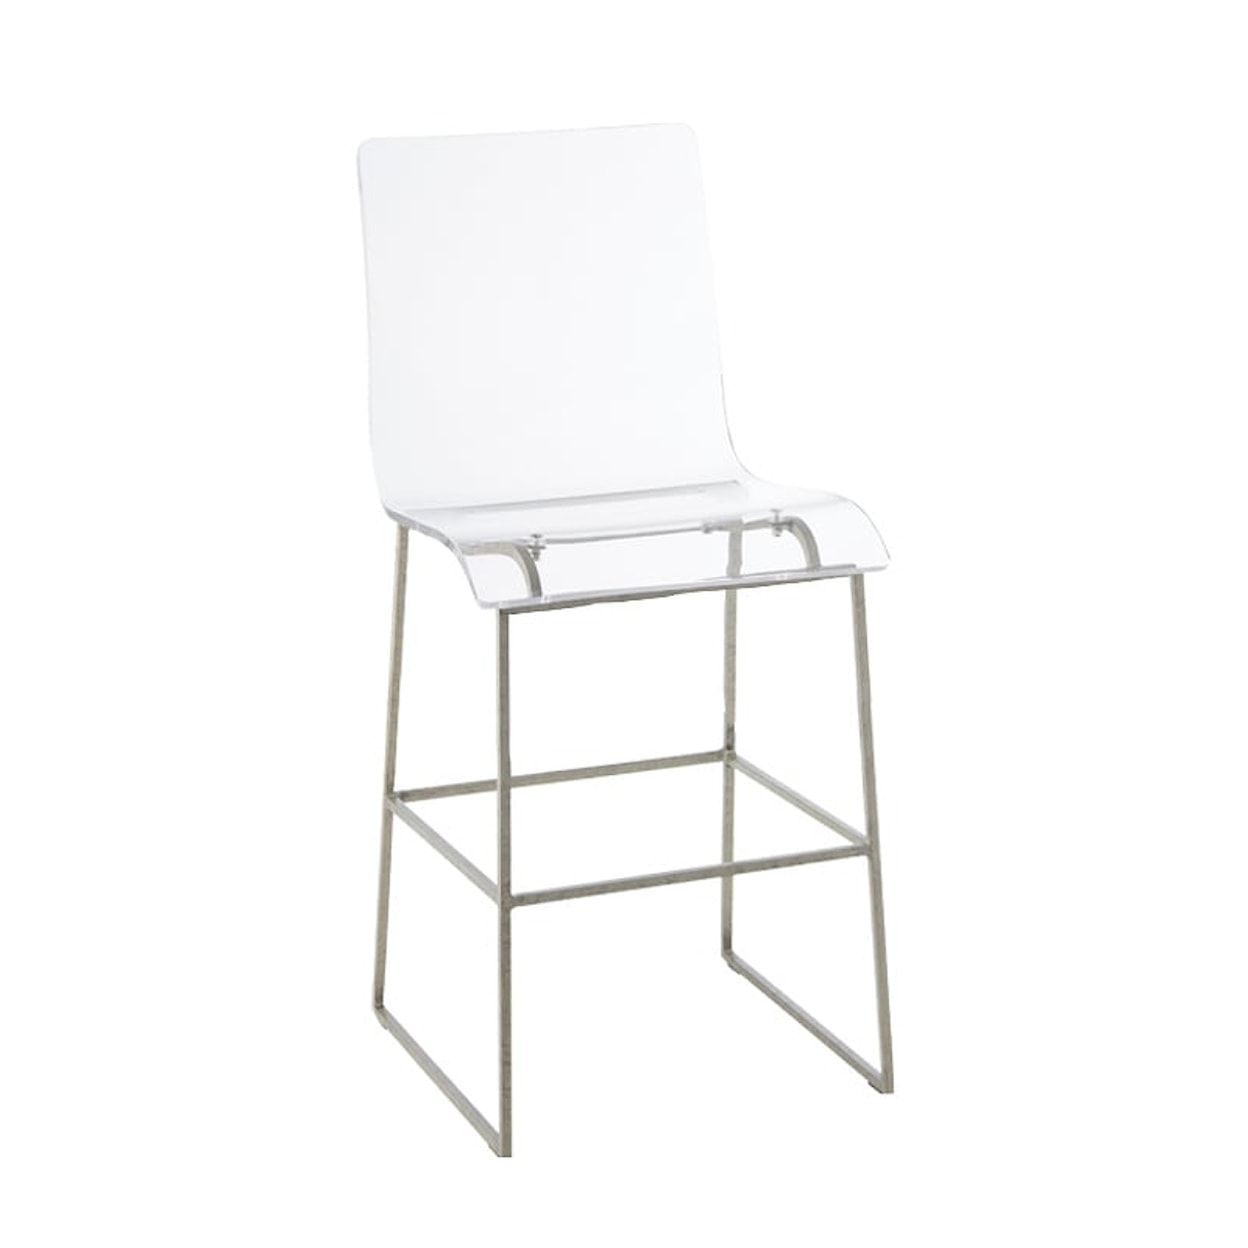 Gabby Stools KING 34.75" COUNTER HEIGHT STOOL-SILVER